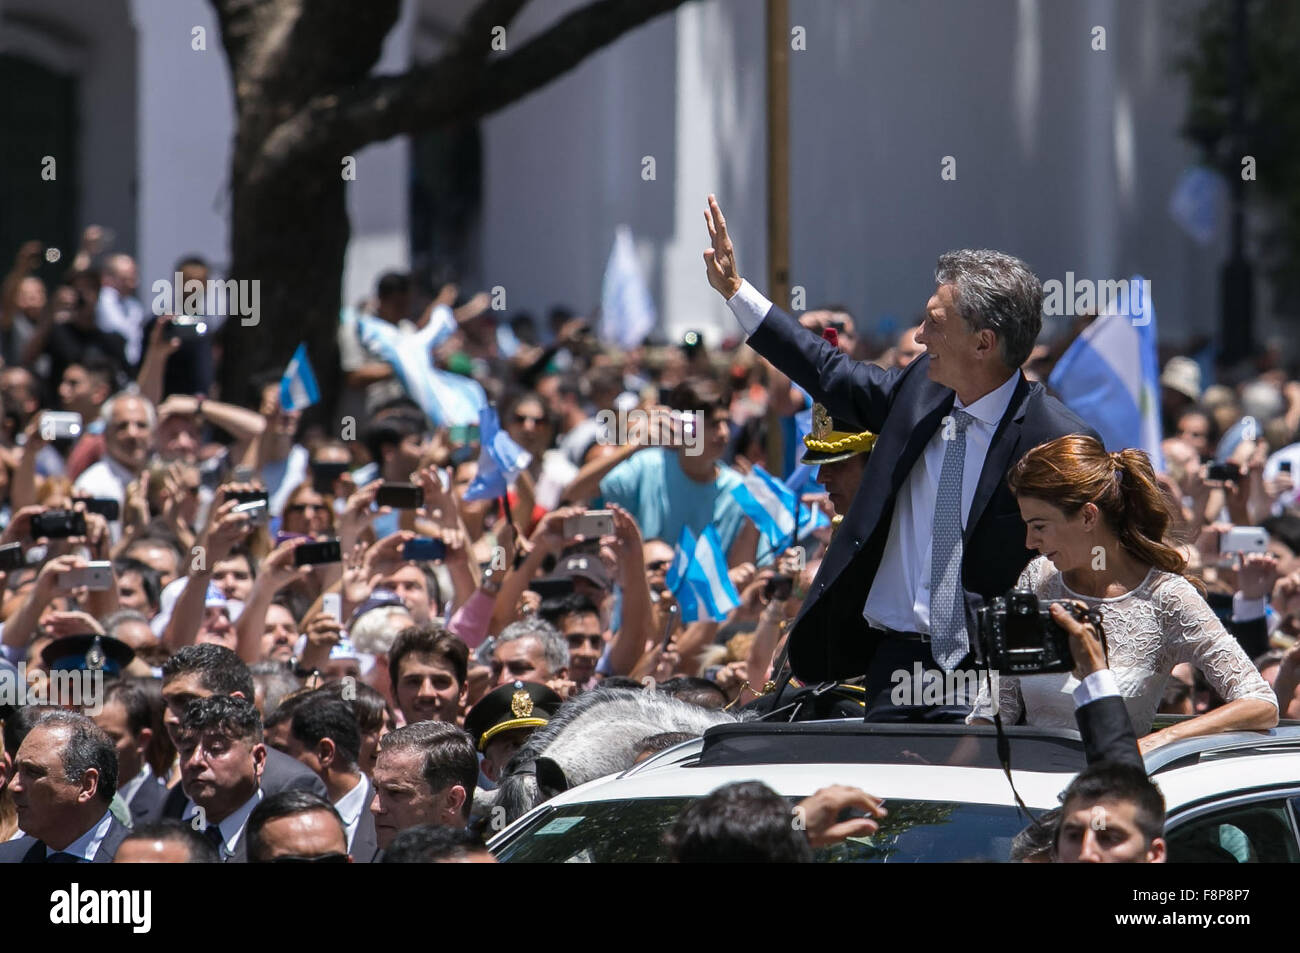 Buenos Aires, Argentina. 10th Dec, 2015. Argentina's President Mauricio Macri and his wife Juliana Awada meet with supporters after his inauguration in Buenos Aires, capital of Argentina, Dec. 10, 2015. Credit:  Sebastian Pani/Xinhua/Alamy Live News Stock Photo